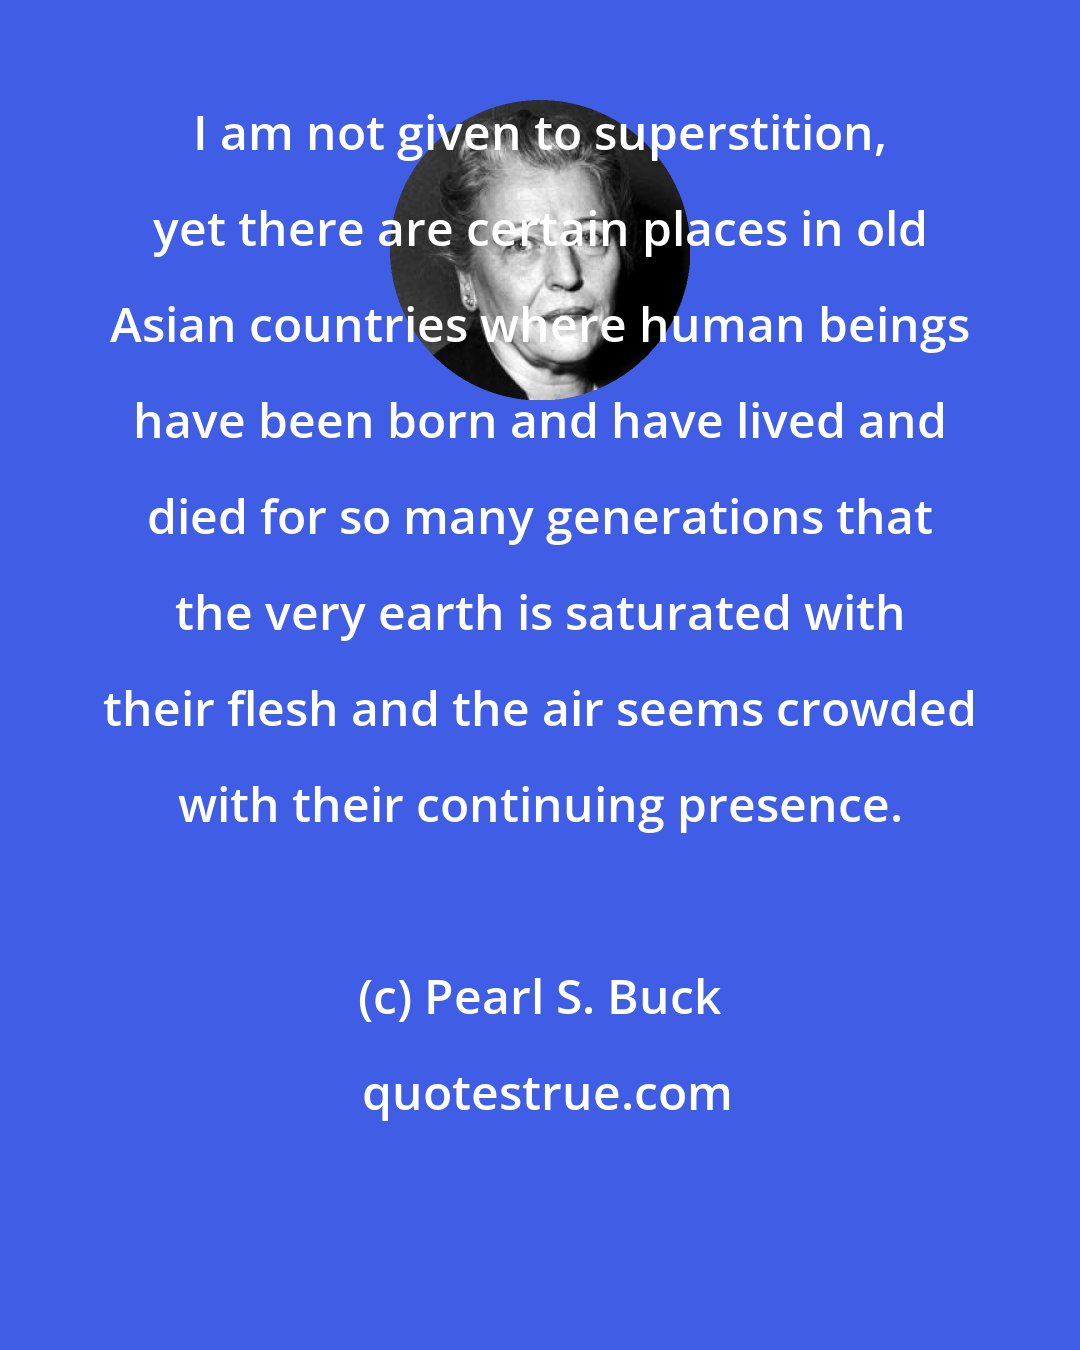 Pearl S. Buck: I am not given to superstition, yet there are certain places in old Asian countries where human beings have been born and have lived and died for so many generations that the very earth is saturated with their flesh and the air seems crowded with their continuing presence.